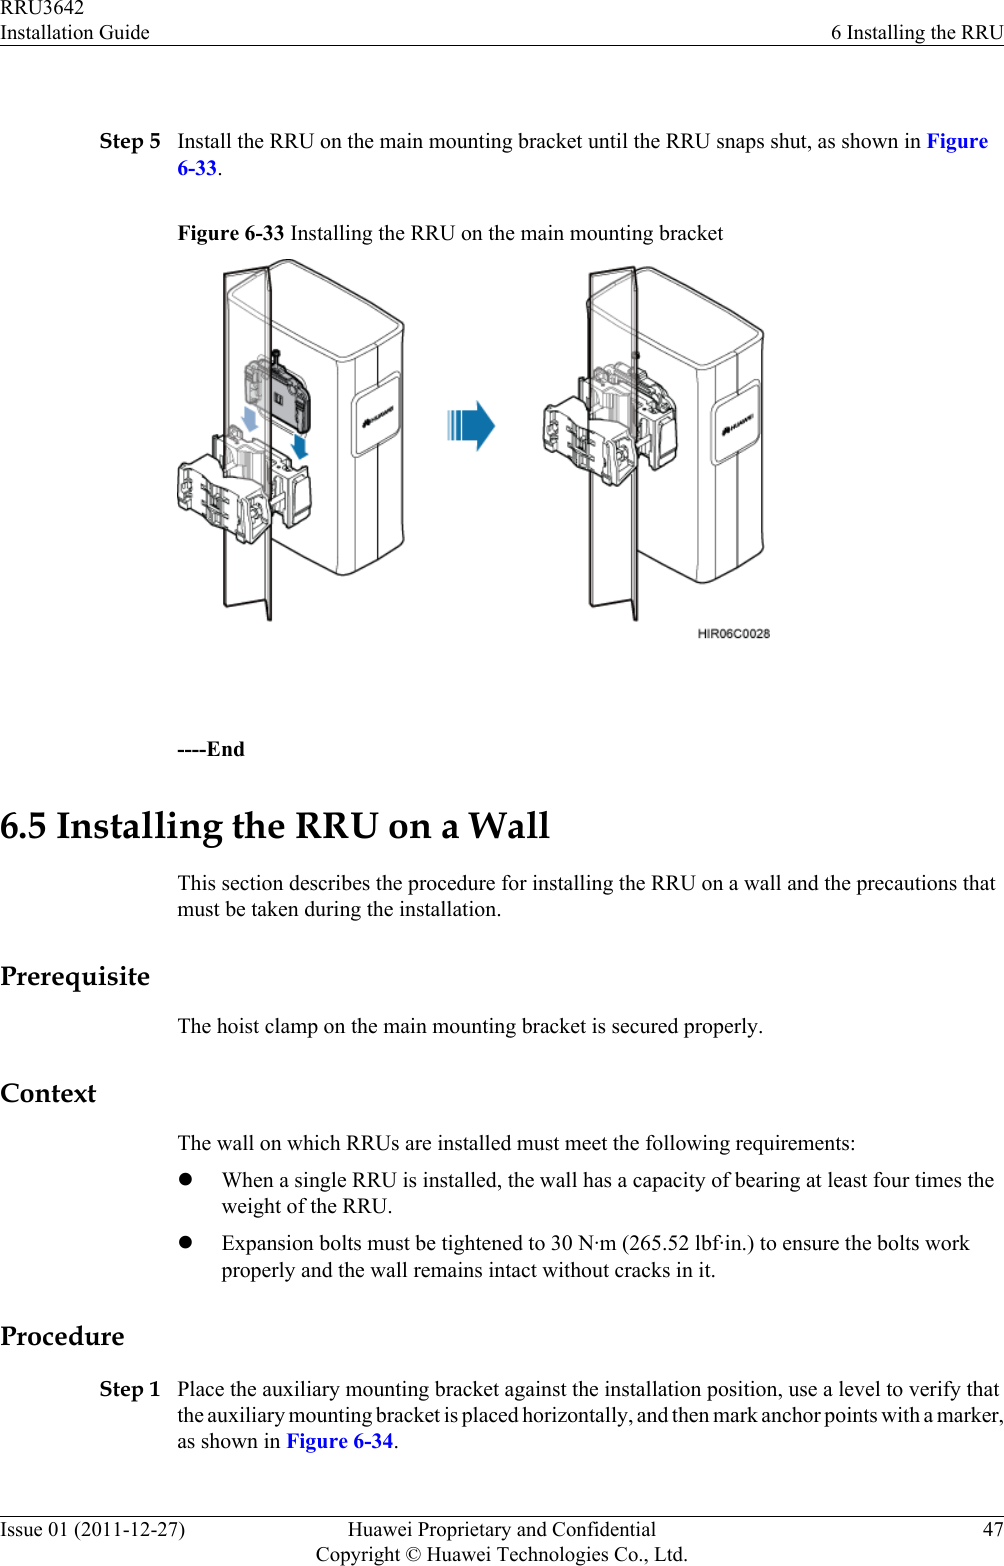  Step 5 Install the RRU on the main mounting bracket until the RRU snaps shut, as shown in Figure6-33.Figure 6-33 Installing the RRU on the main mounting bracket ----End6.5 Installing the RRU on a WallThis section describes the procedure for installing the RRU on a wall and the precautions thatmust be taken during the installation.PrerequisiteThe hoist clamp on the main mounting bracket is secured properly.ContextThe wall on which RRUs are installed must meet the following requirements:lWhen a single RRU is installed, the wall has a capacity of bearing at least four times theweight of the RRU.lExpansion bolts must be tightened to 30 N·m (265.52 lbf·in.) to ensure the bolts workproperly and the wall remains intact without cracks in it.ProcedureStep 1 Place the auxiliary mounting bracket against the installation position, use a level to verify thatthe auxiliary mounting bracket is placed horizontally, and then mark anchor points with a marker,as shown in Figure 6-34.RRU3642Installation Guide 6 Installing the RRUIssue 01 (2011-12-27) Huawei Proprietary and ConfidentialCopyright © Huawei Technologies Co., Ltd.47